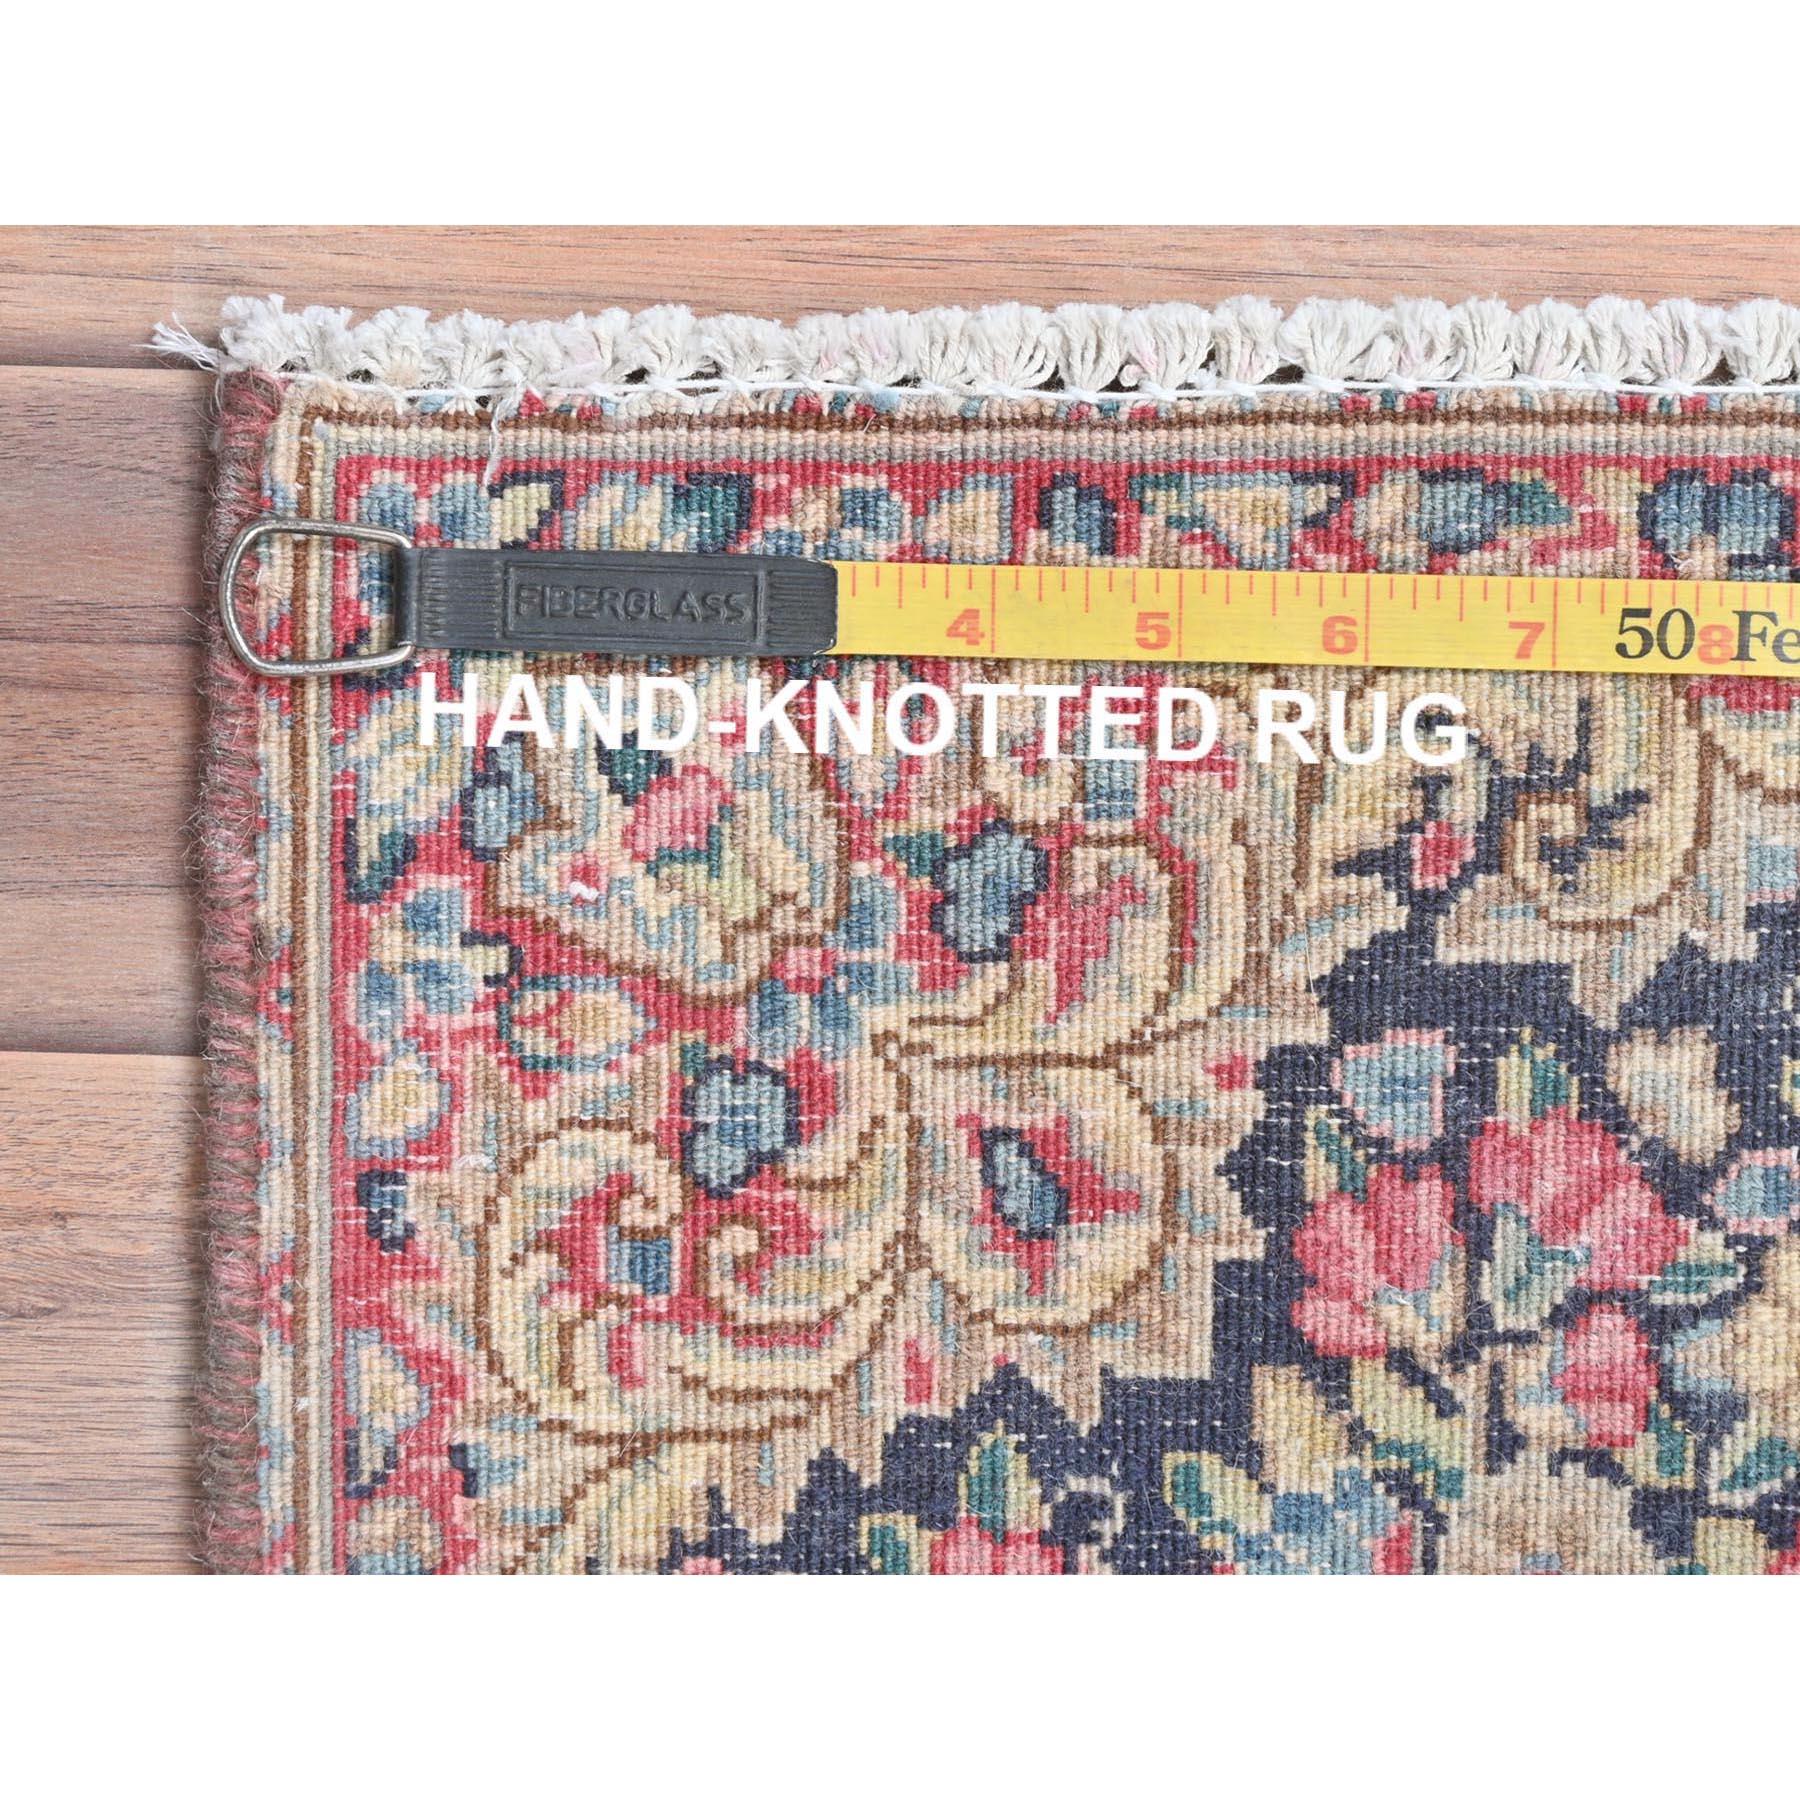 Colorful Distressed Look Worn Wool Hand Knotted Vintage Persian Kerman Rug For Sale 1